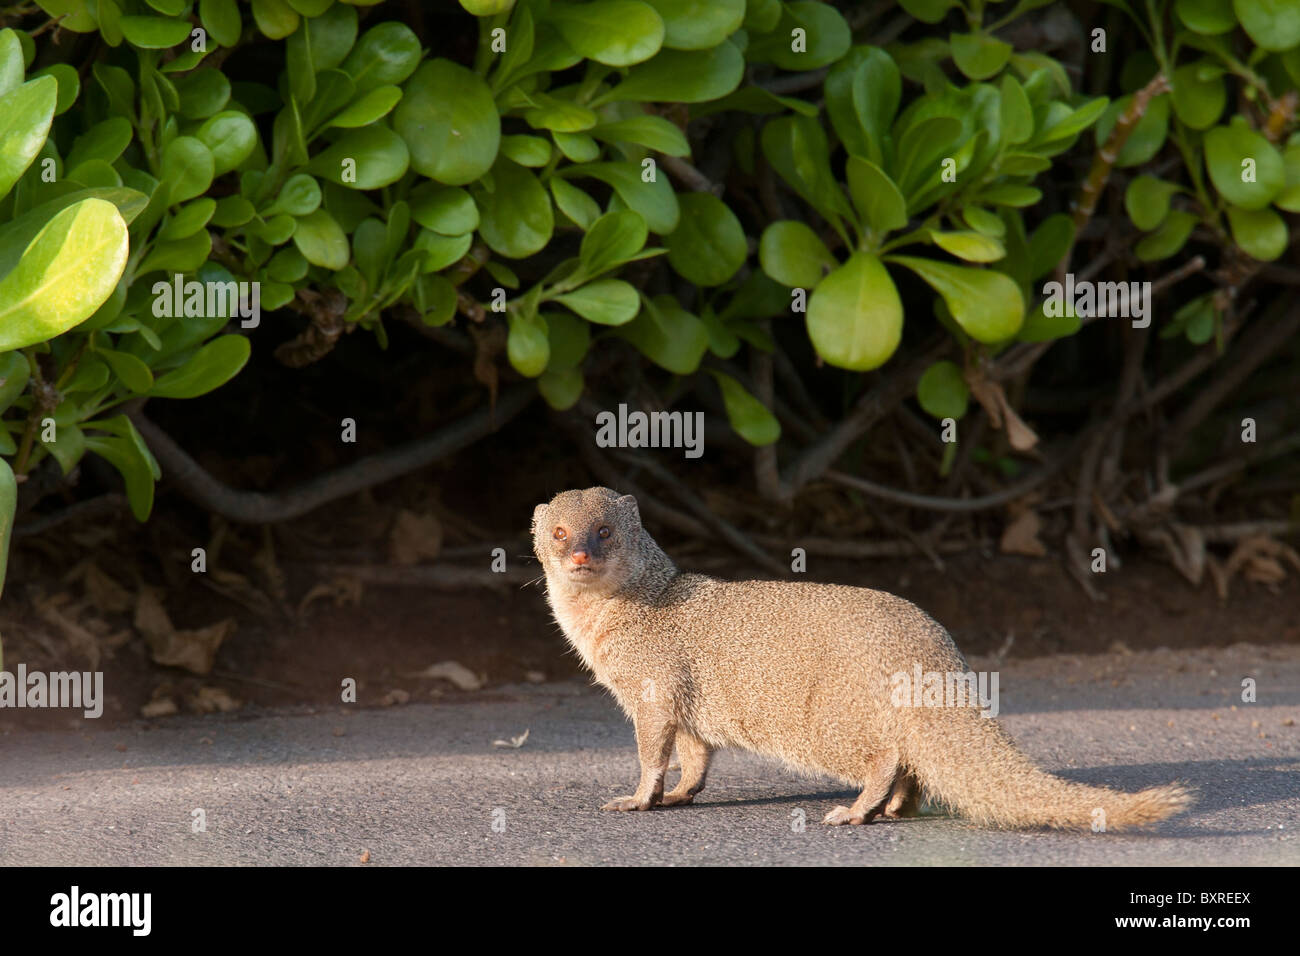 Mongoose (Herpestes javanicus) prowling the grounds of the Waikoloa Beach Marriott Resort & Spa in Hawaii. Stock Photo